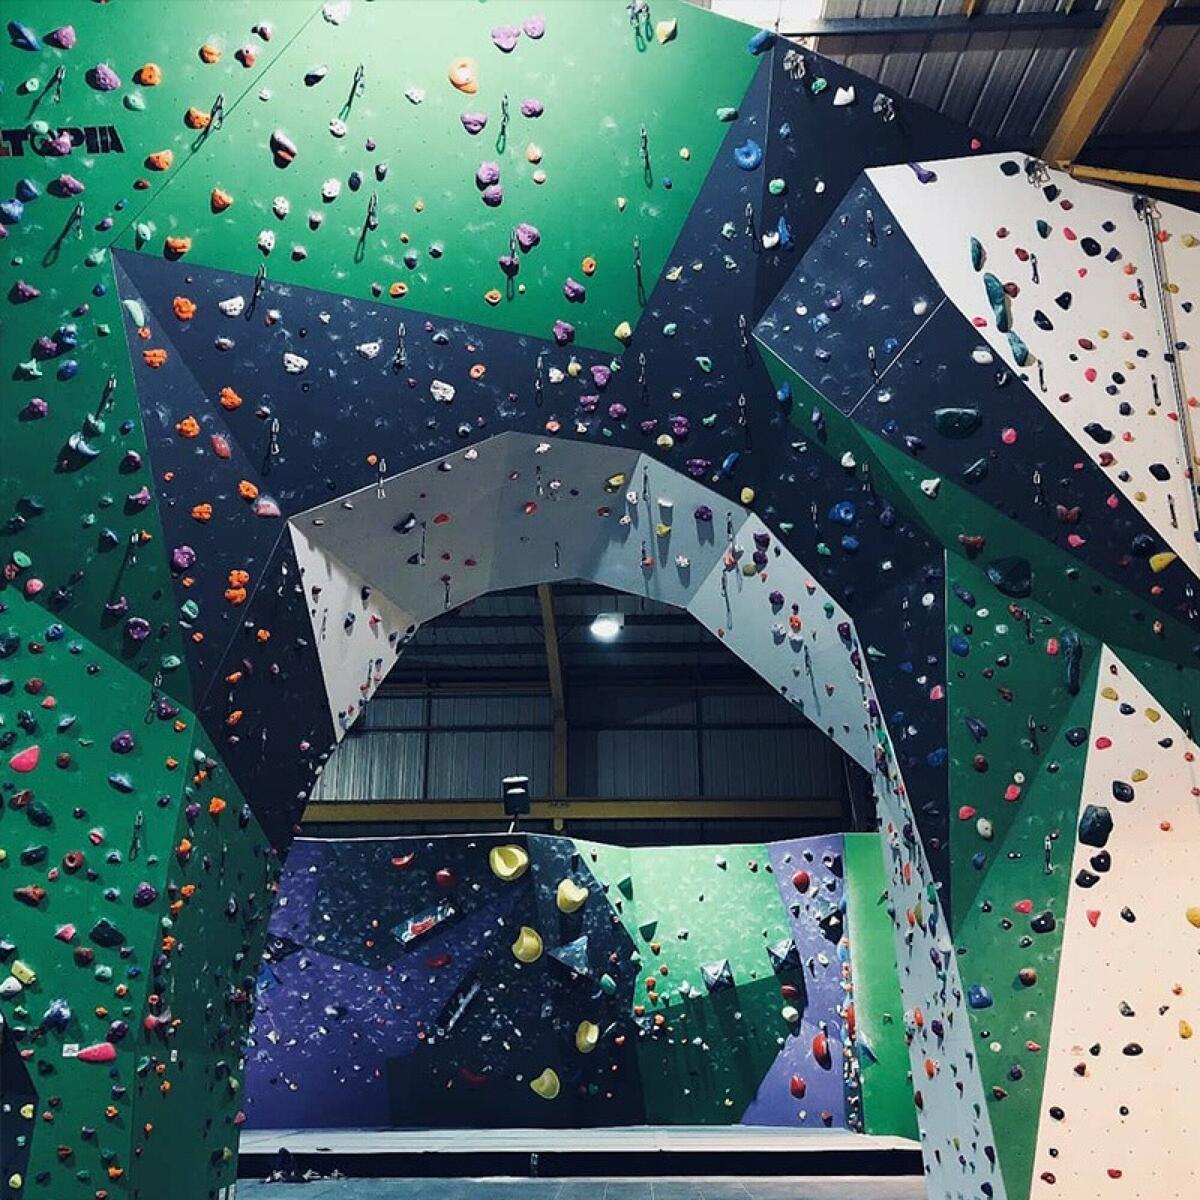 Green Spider Indoor Climbing Wall in Hereford